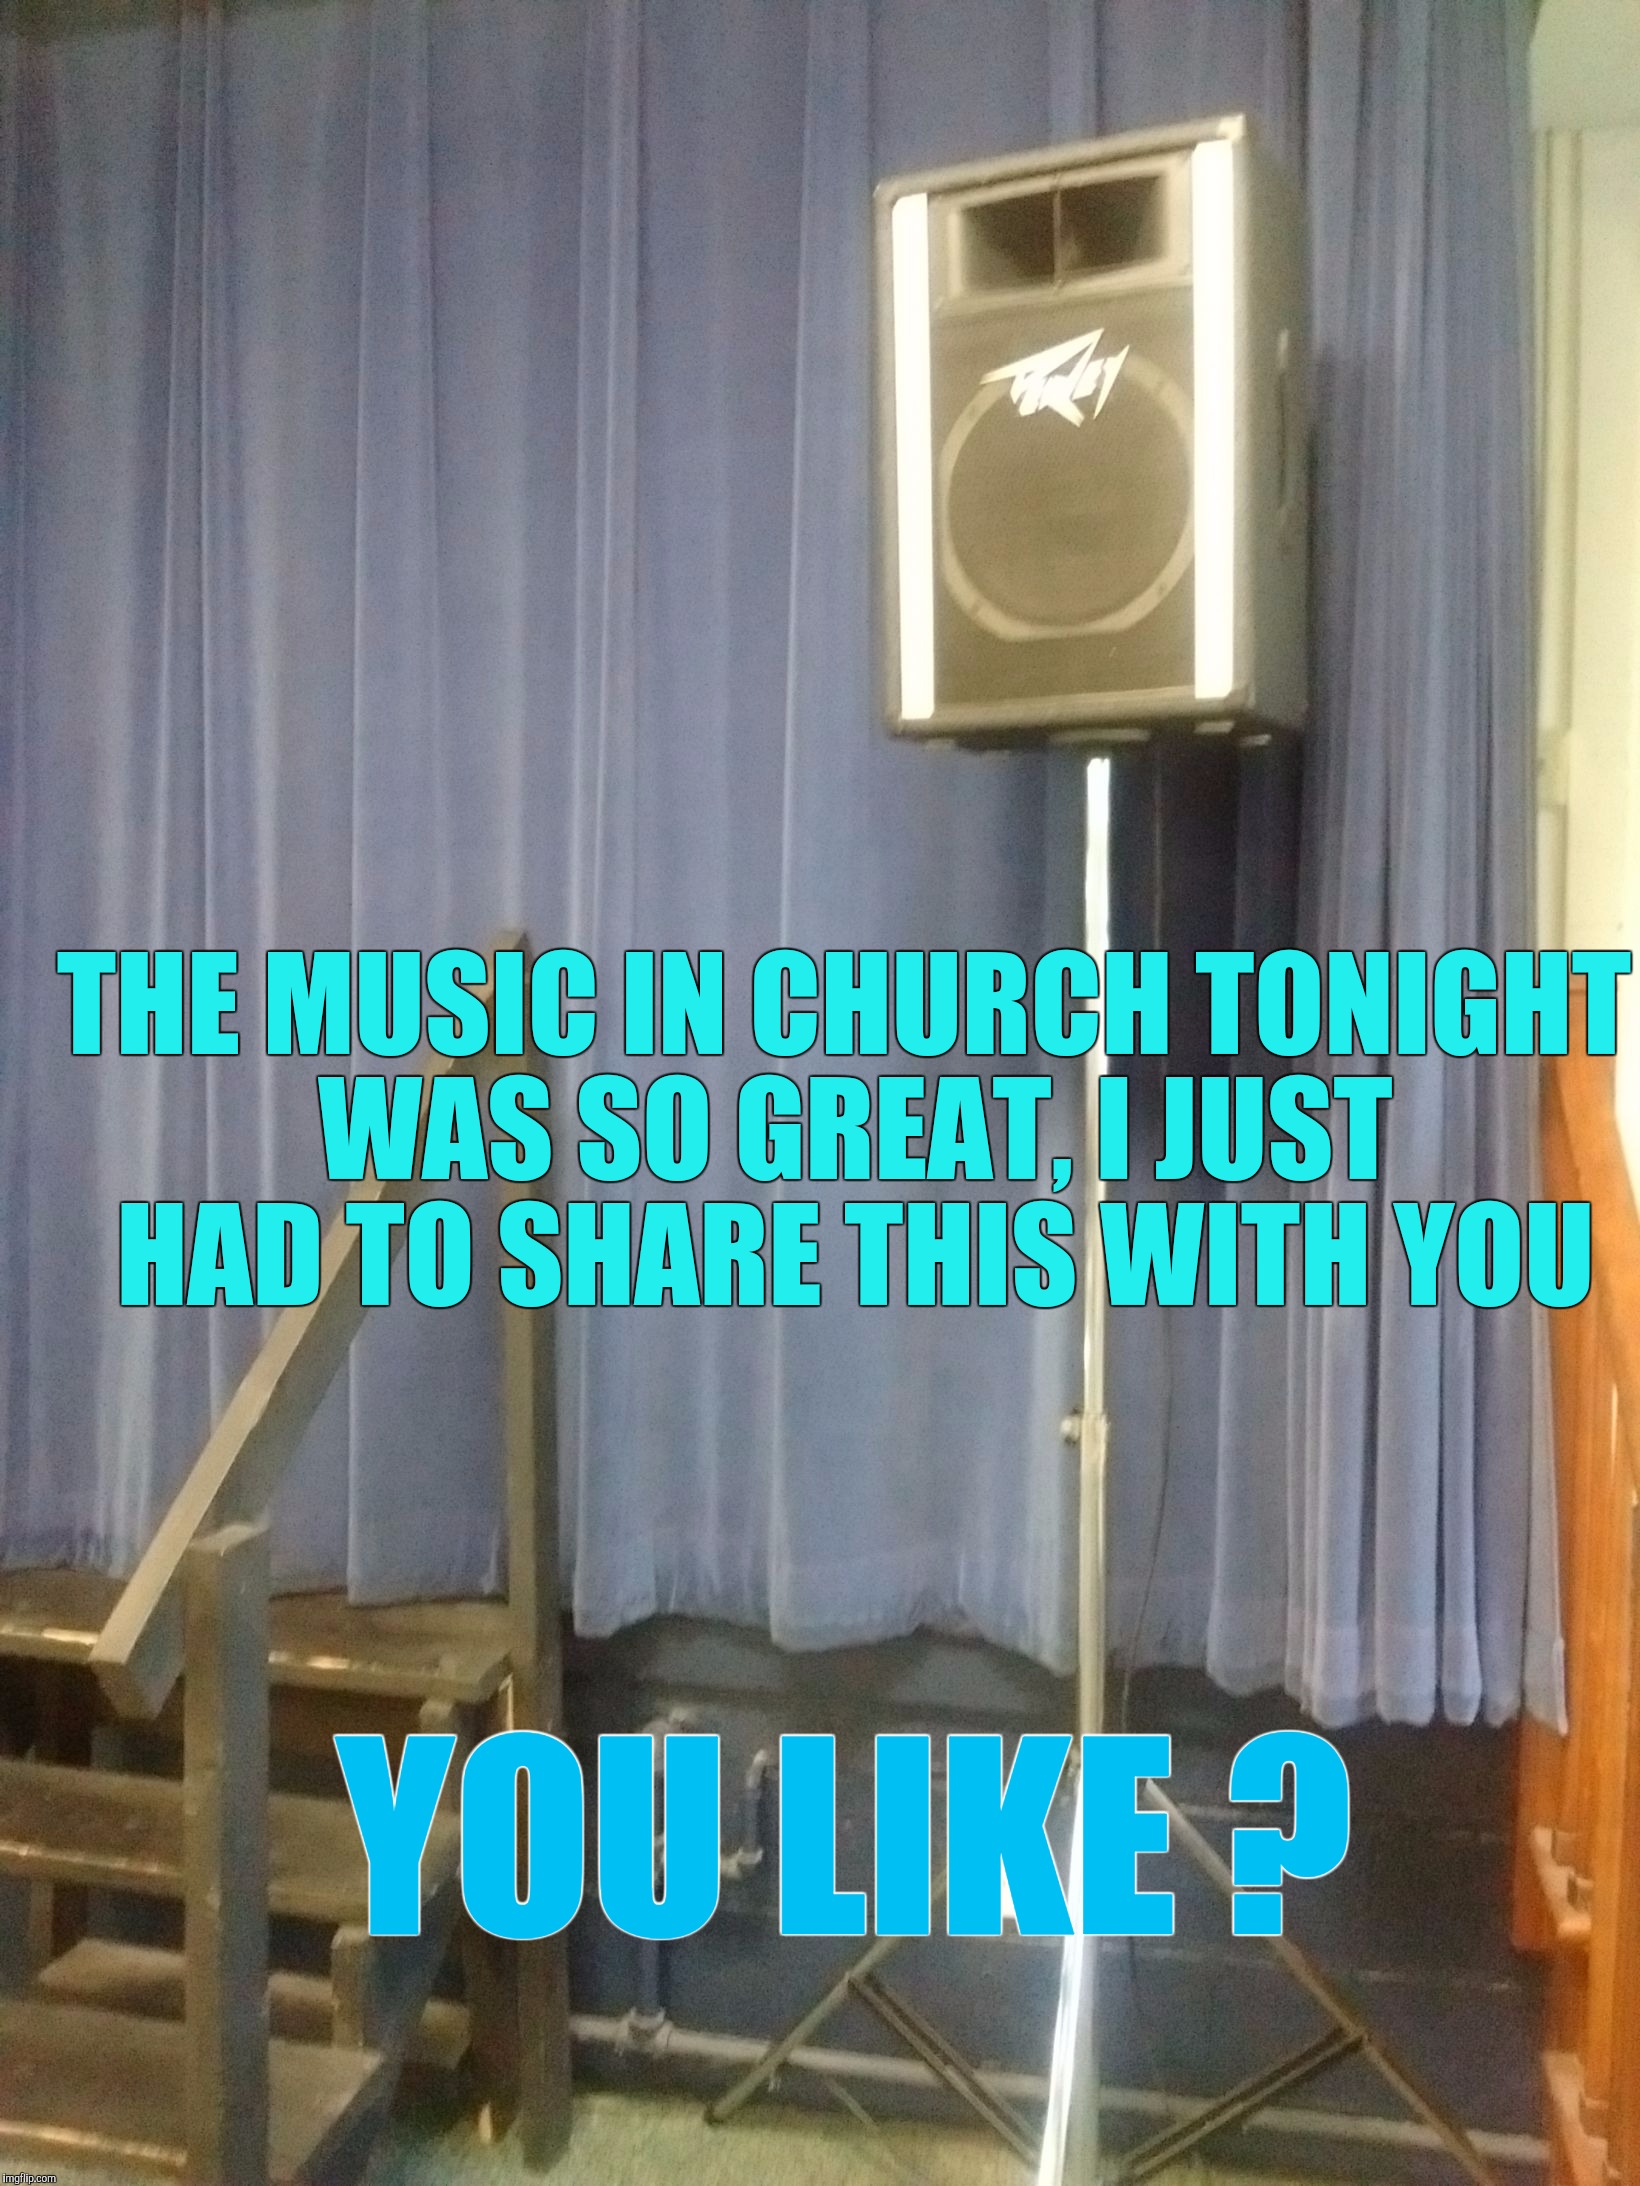 Braille Edition Release Soon | THE MUSIC IN CHURCH TONIGHT WAS SO GREAT, I JUST HAD TO SHARE THIS WITH YOU; YOU LIKE ? | image tagged in memes,music,speaker,sound system,radio | made w/ Imgflip meme maker